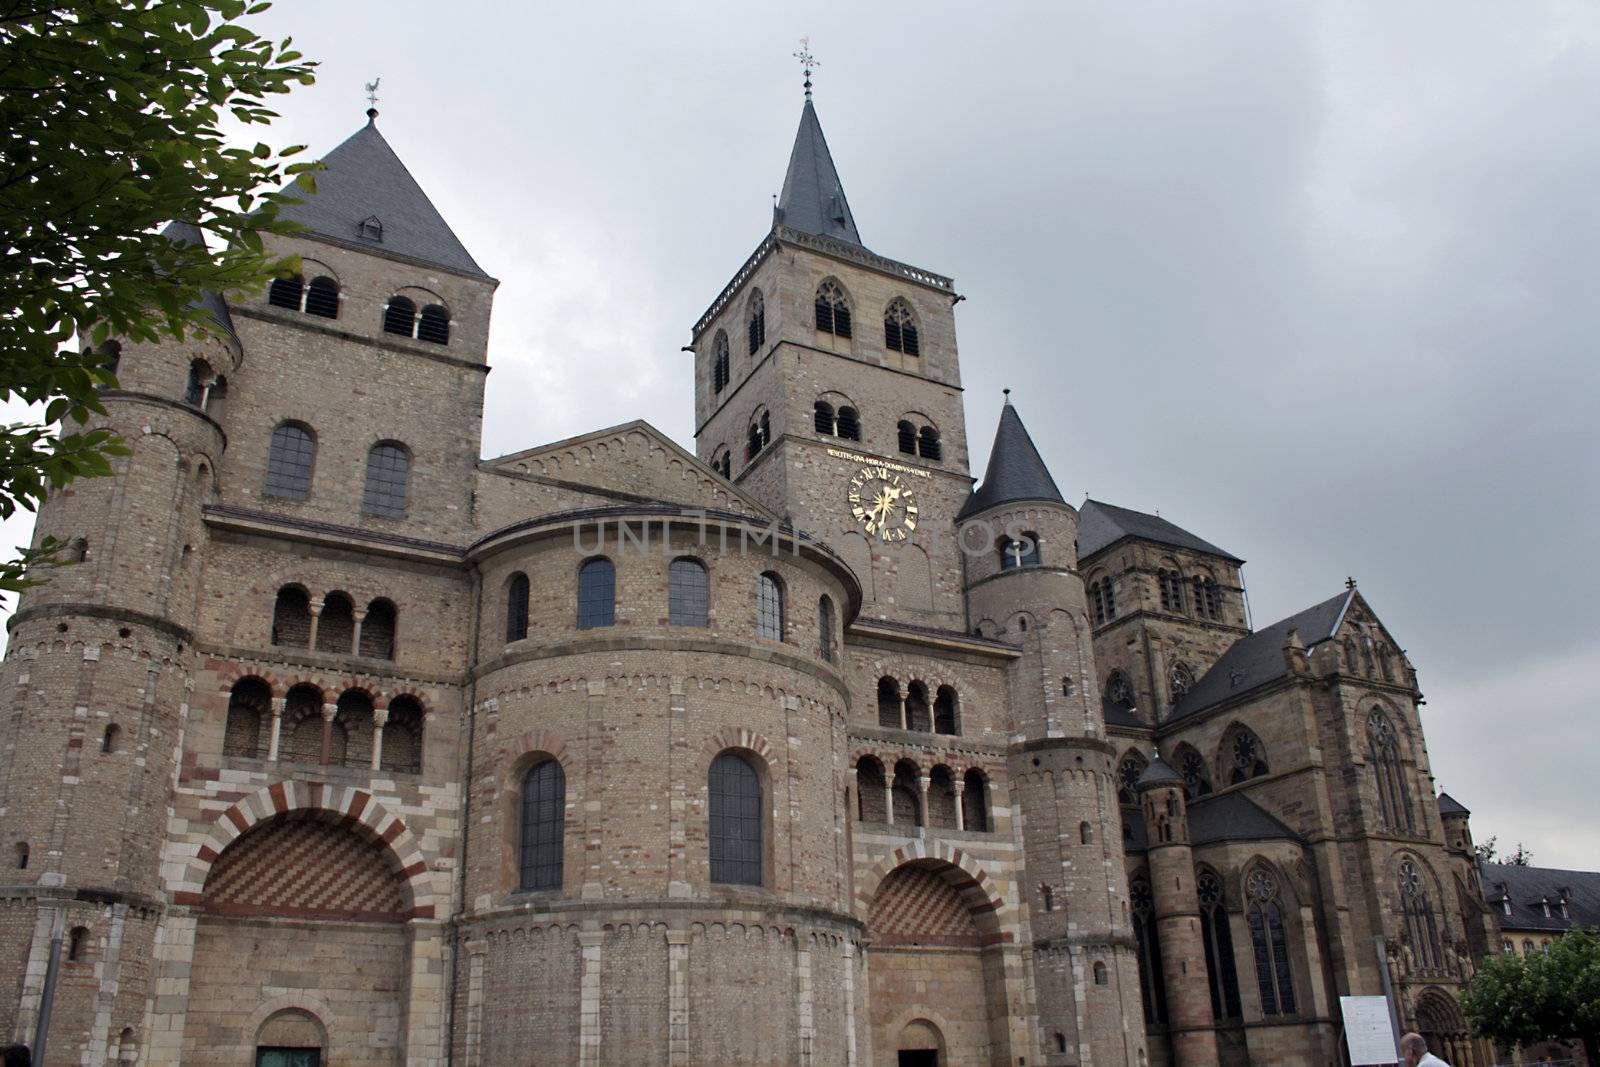 Front view of the Trier Cathedral, Rhineland-Palatinate, Germany.